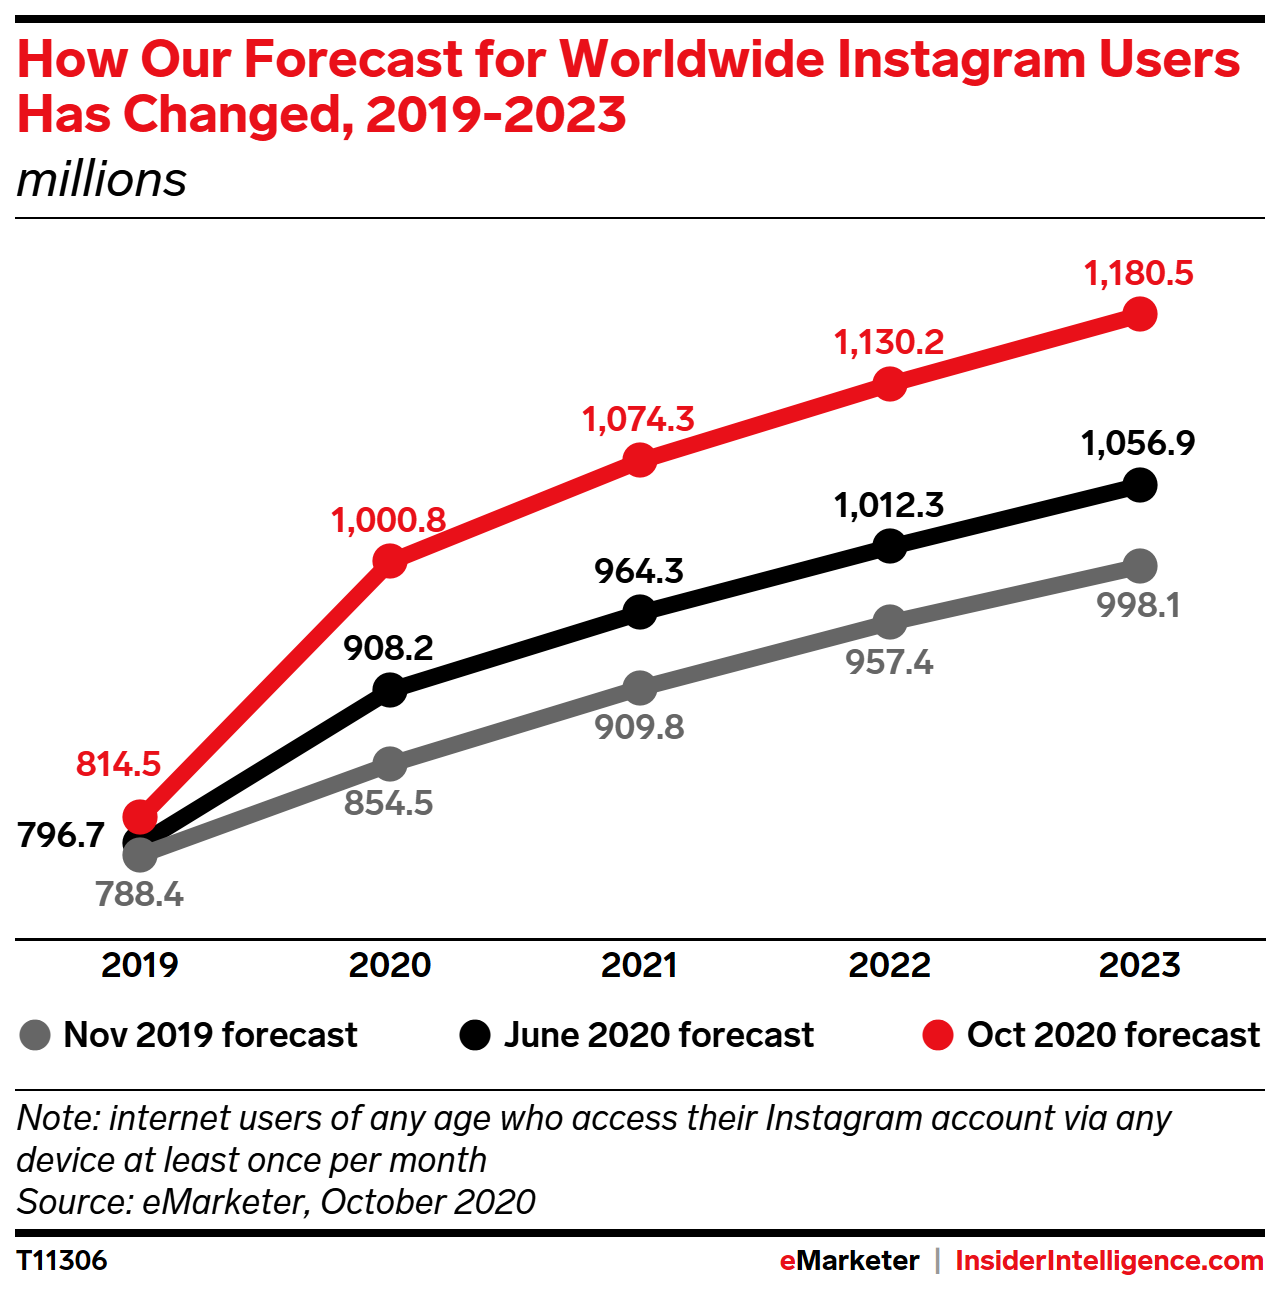 How Our Forecast for Instagram Users Worldwide Has Changed, 2019-2023 (millions)